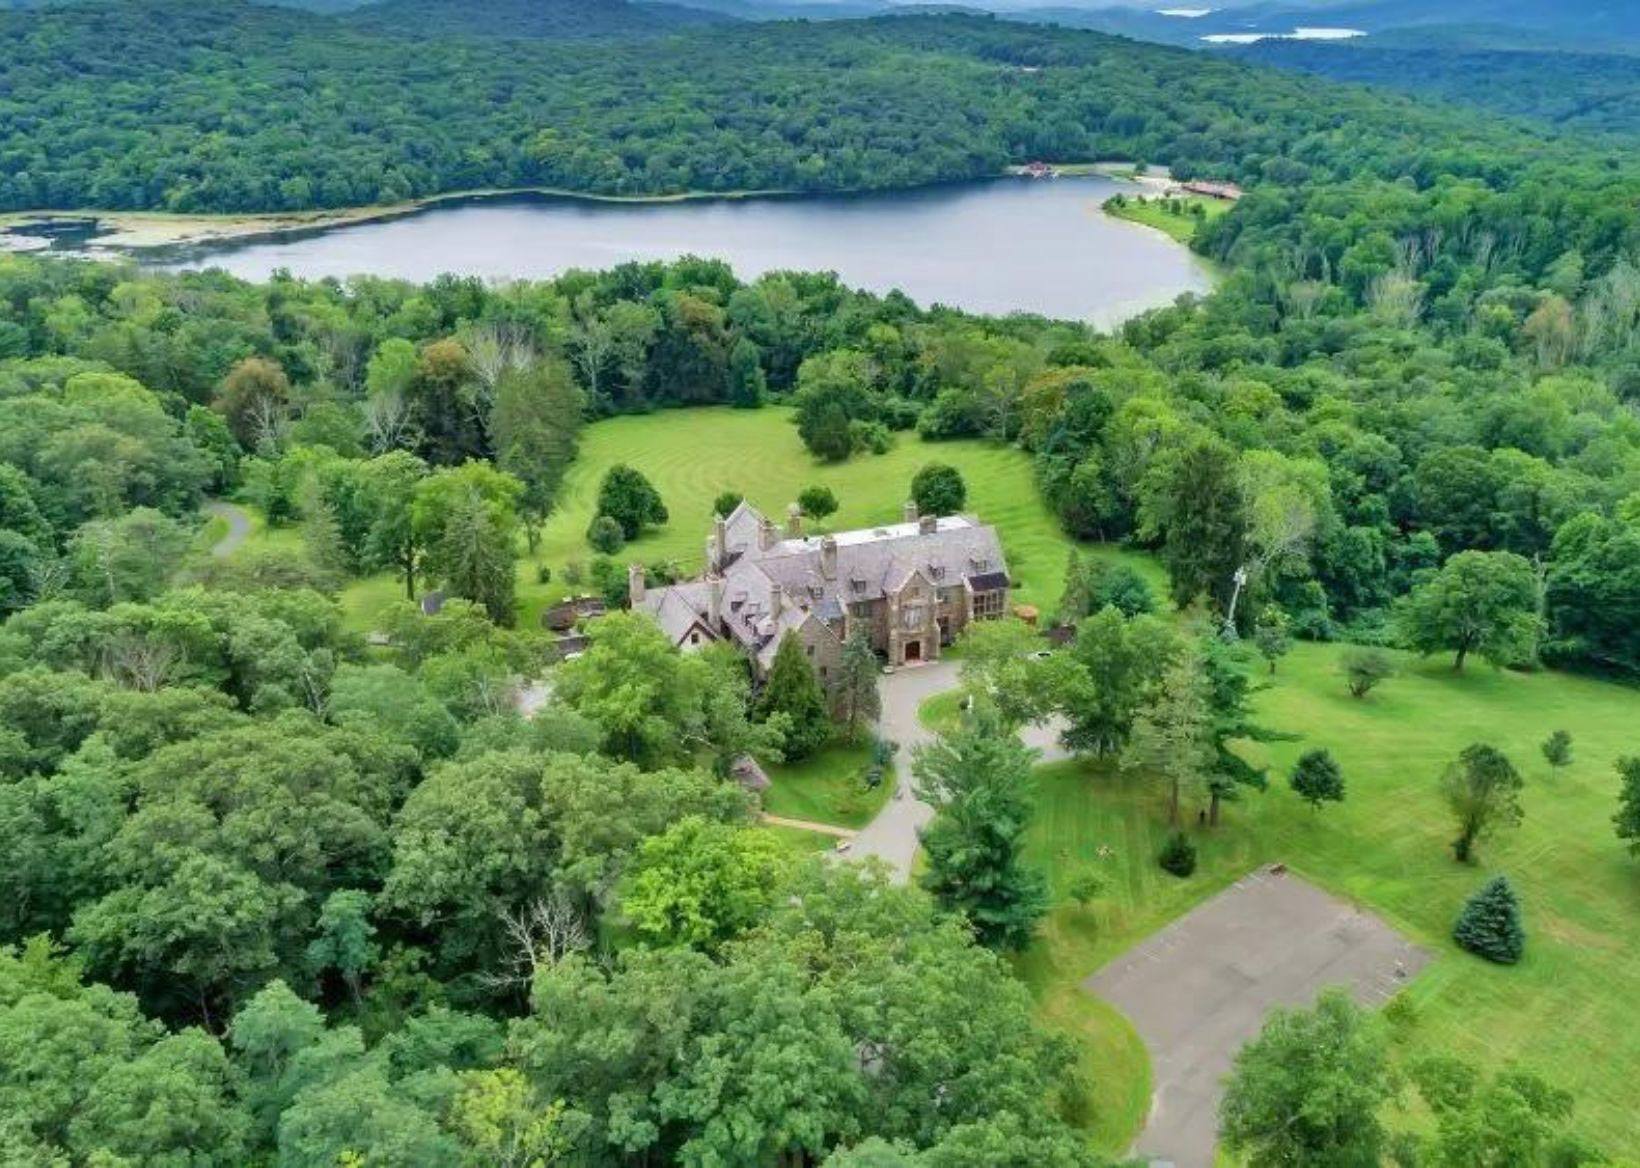 The Ranch lakefront estate nestled amidst 200 acres